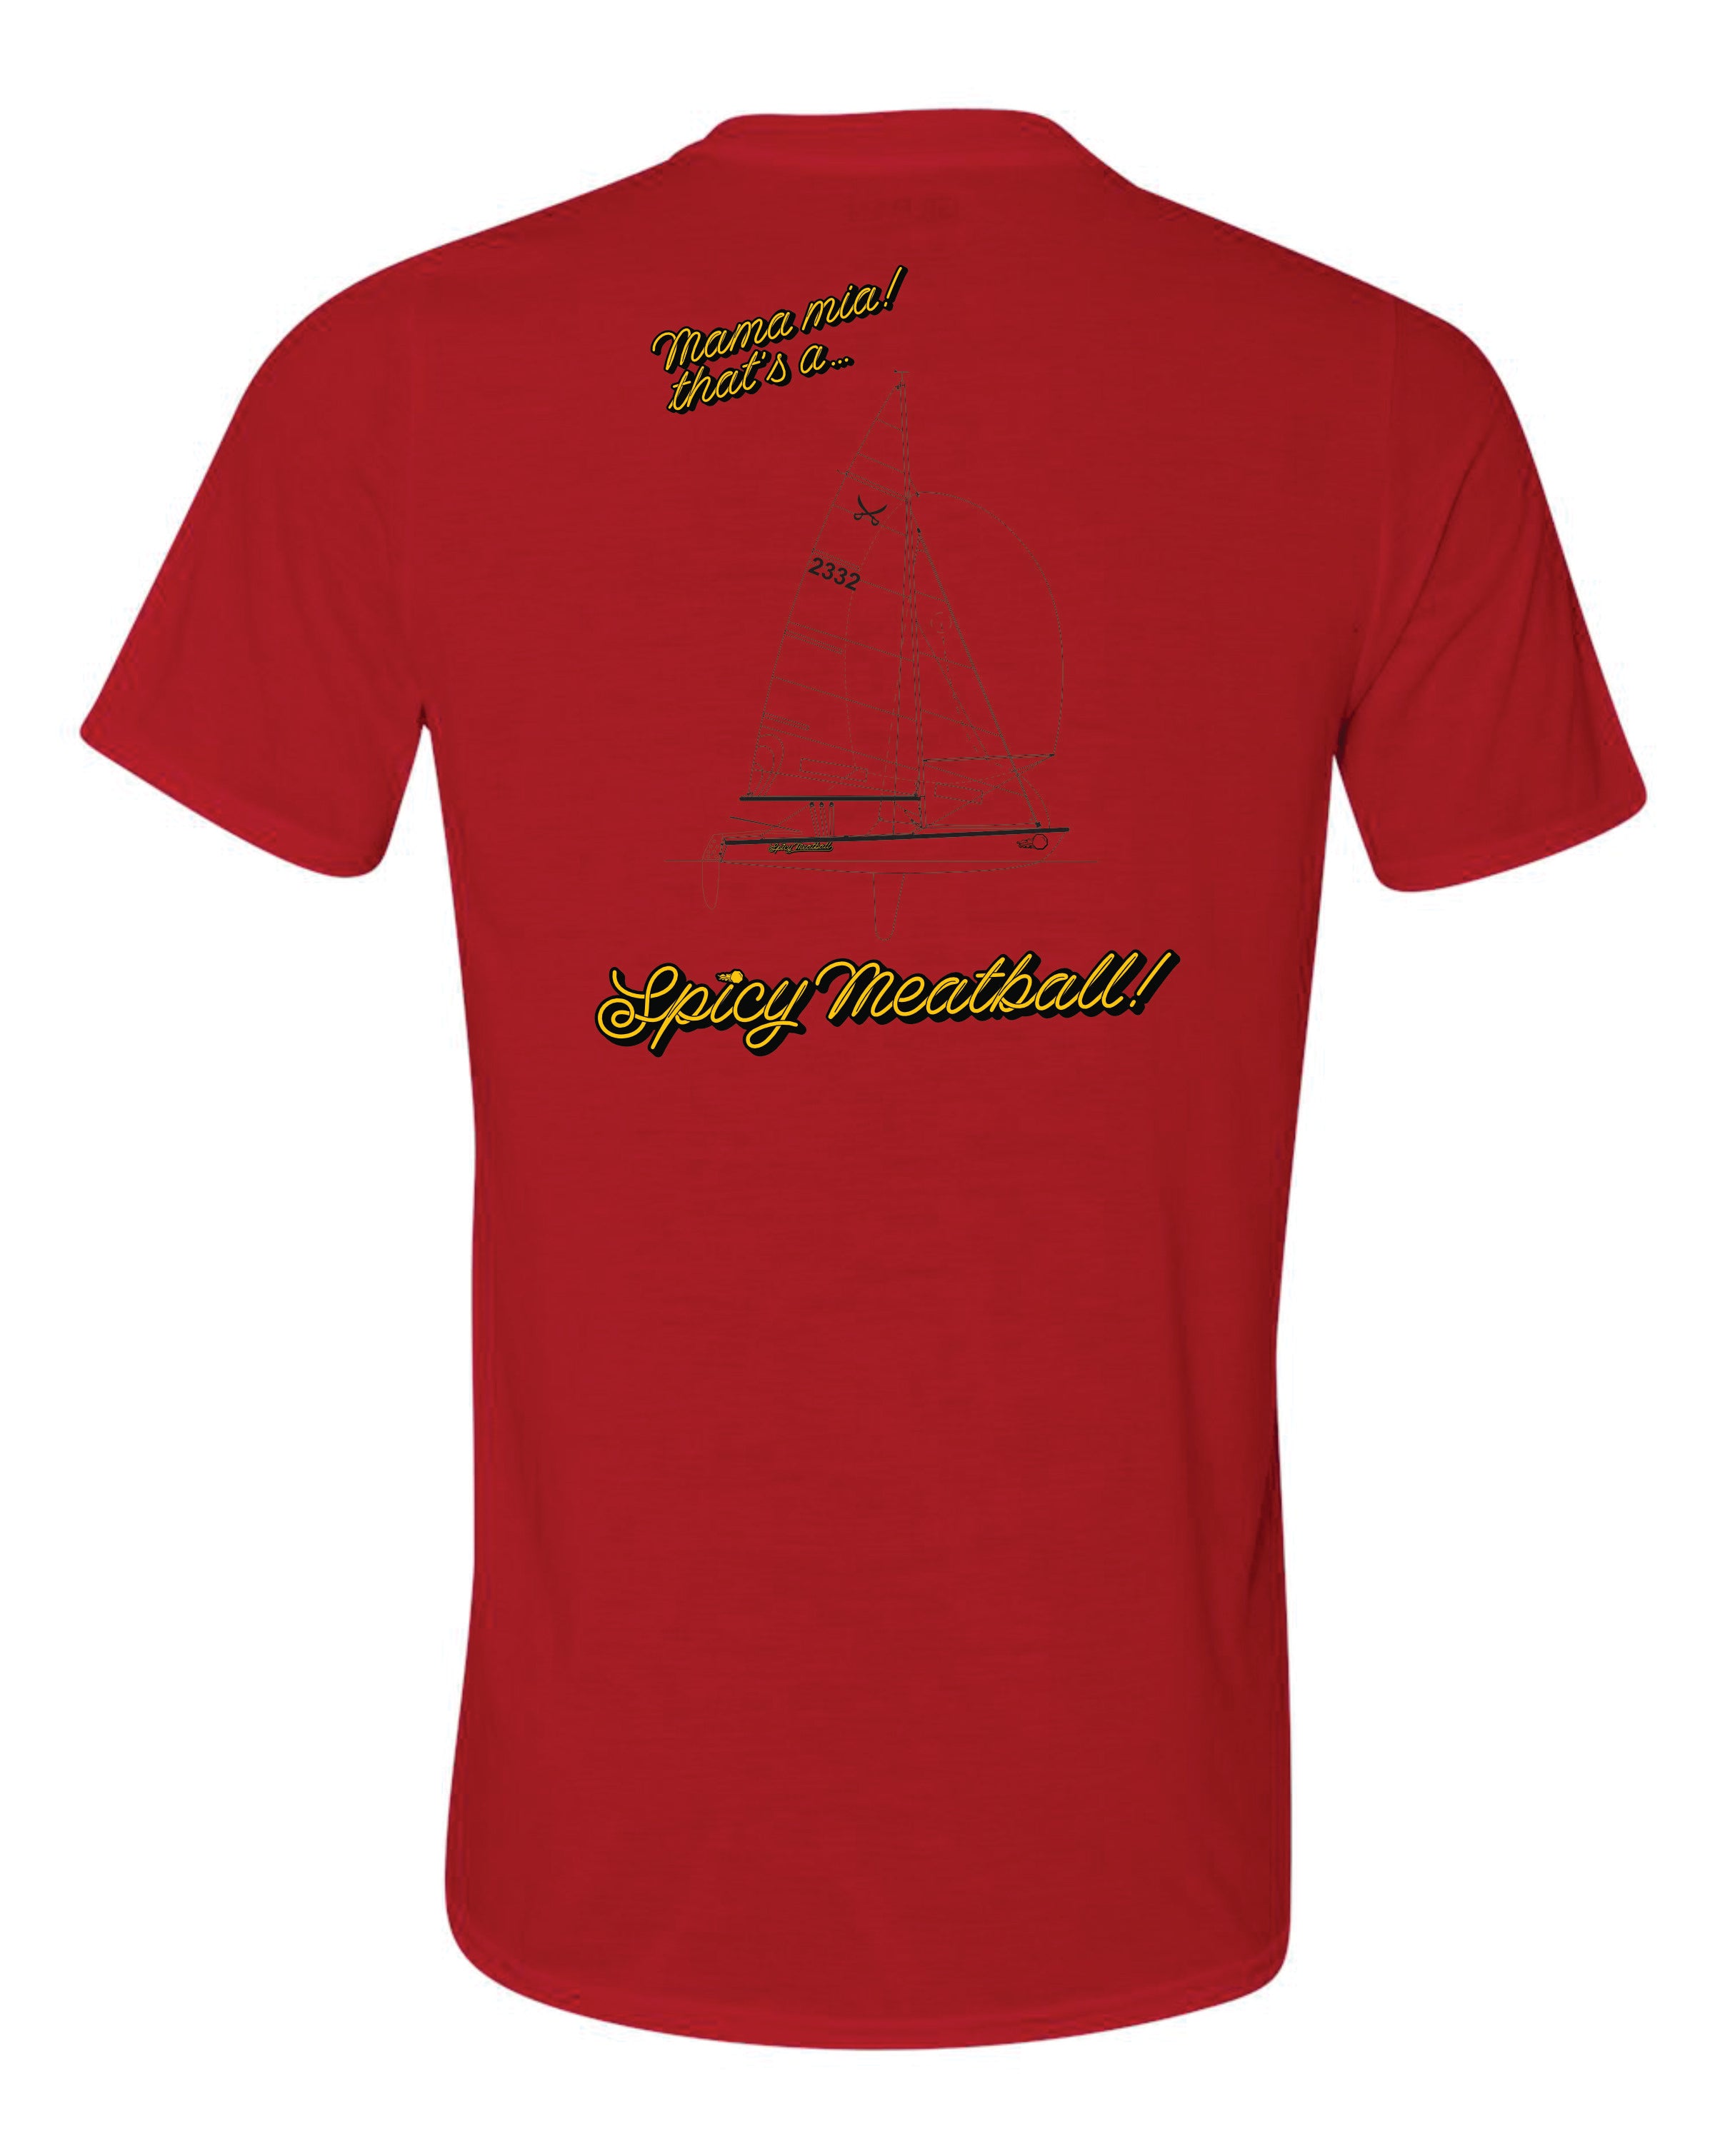 Spicy Meatball Sailing Team shirts